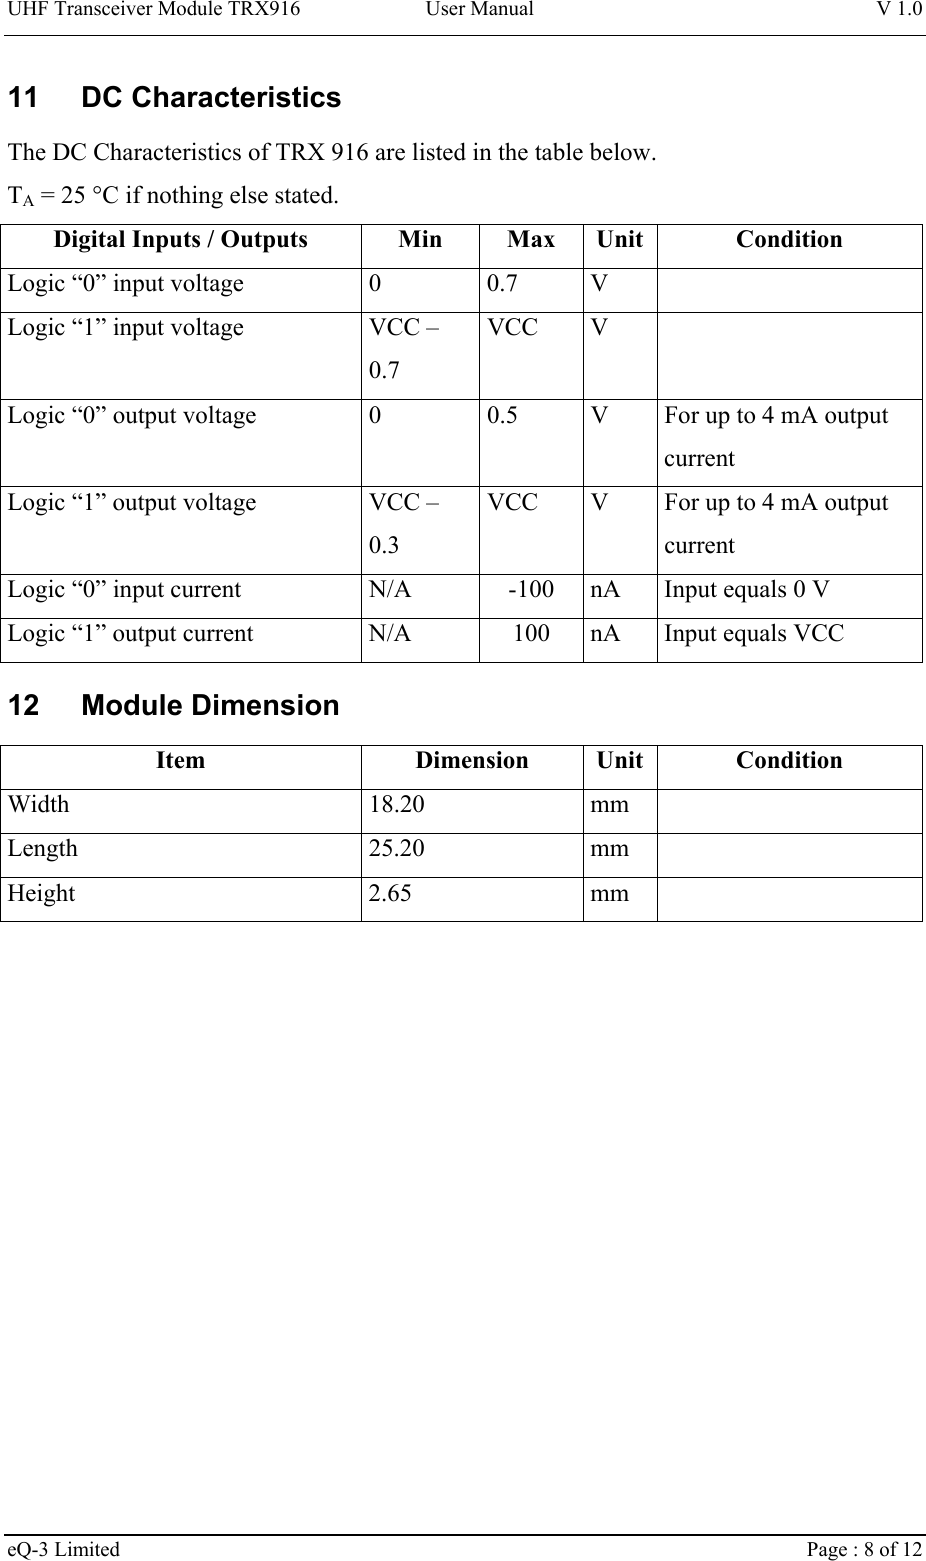 UHF Transceiver Module TRX916 User Manual  V 1.0 eQ-3 Limited    Page : 8 of 12 11 DC Characteristics The DC Characteristics of TRX 916 are listed in the table below. TA = 25 °C if nothing else stated. Digital Inputs / Outputs  Min  Max  Unit  Condition Logic “0” input voltage  0  0.7  V   Logic “1” input voltage  VCC – 0.7 VCC V   Logic “0” output voltage  0  0.5  V  For up to 4 mA output current Logic “1” output voltage  VCC – 0.3 VCC  V  For up to 4 mA output current Logic “0” input current  N/A  -100  nA  Input equals 0 V Logic “1” output current  N/A  100  nA  Input equals VCC 12 Module Dimension Item Dimension Unit Condition Width 18.20 mm  Length 25.20 mm  Height 2.65 mm  